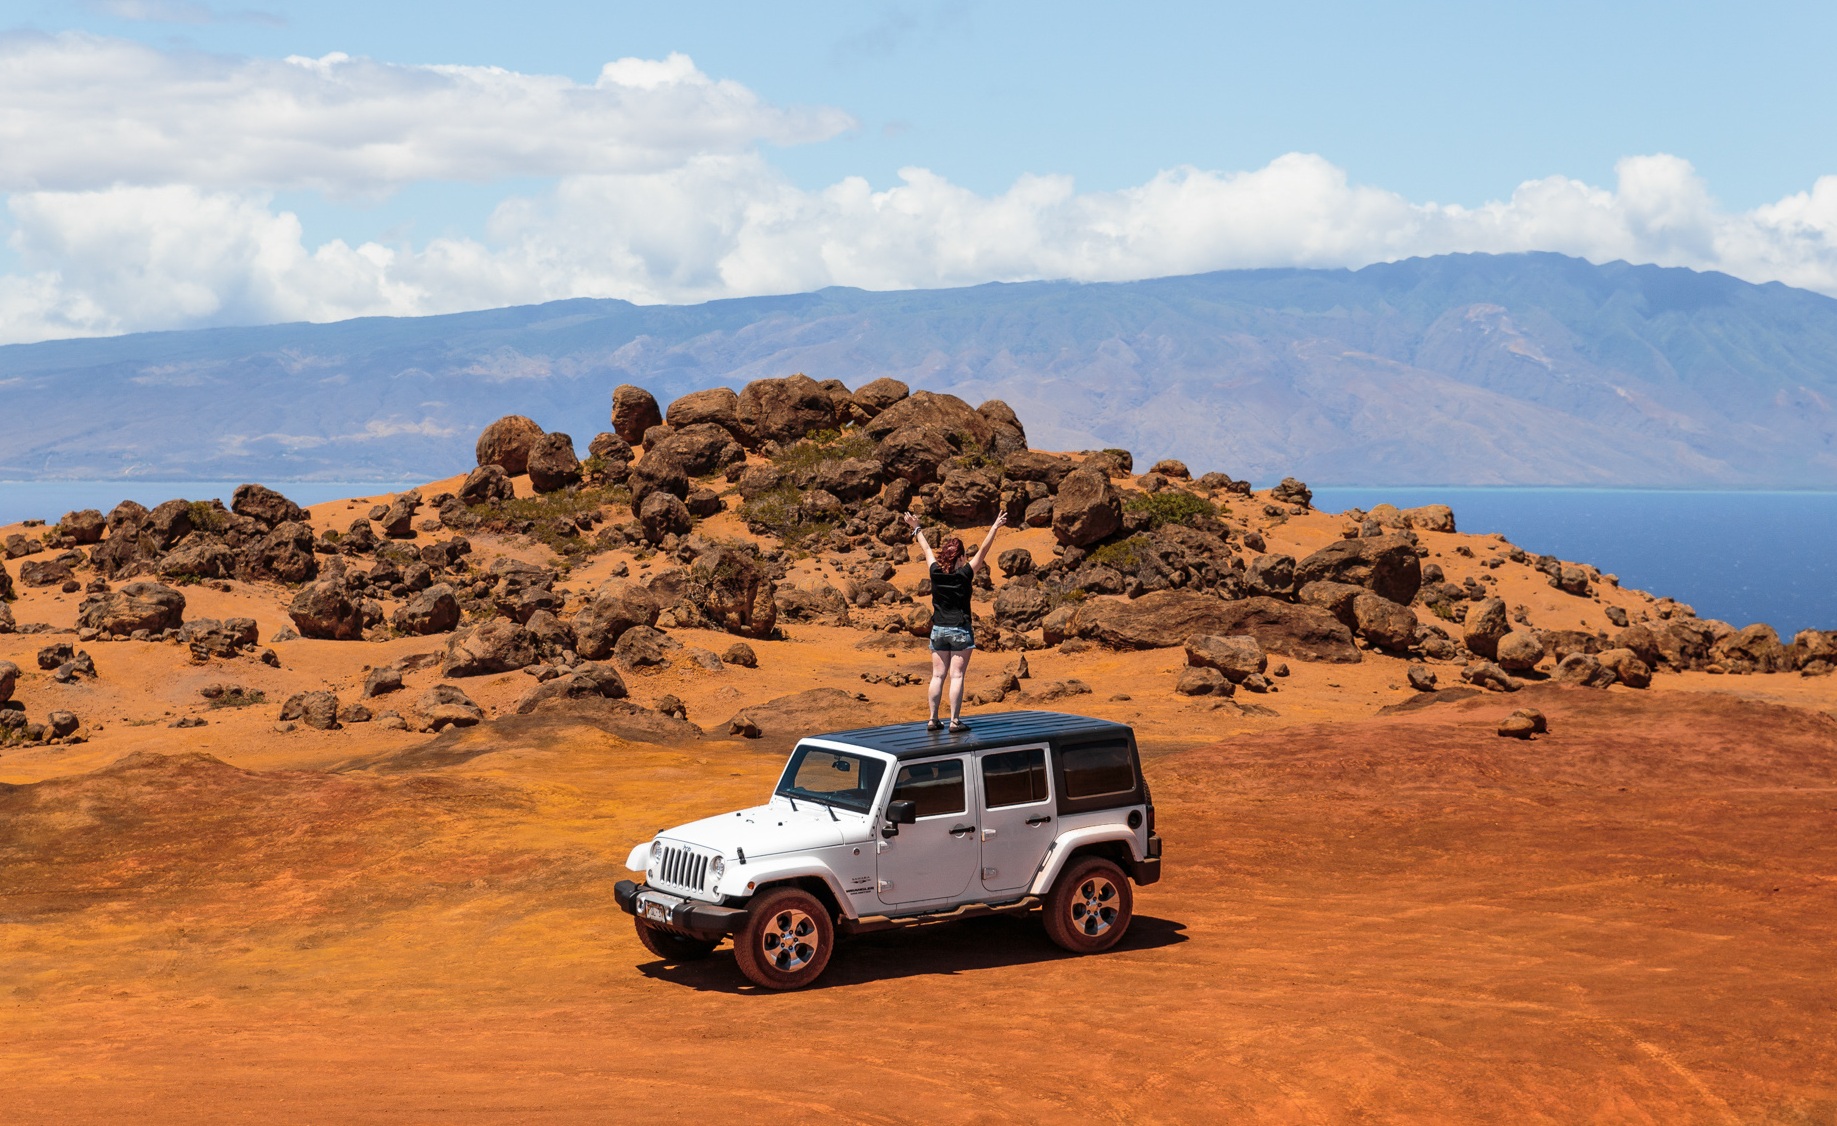 Off-roading in a Jeep on Lanai's red sand // The Quick Guide to Visiting Maui, Hawaii #readysetjetset #hawaii #maui